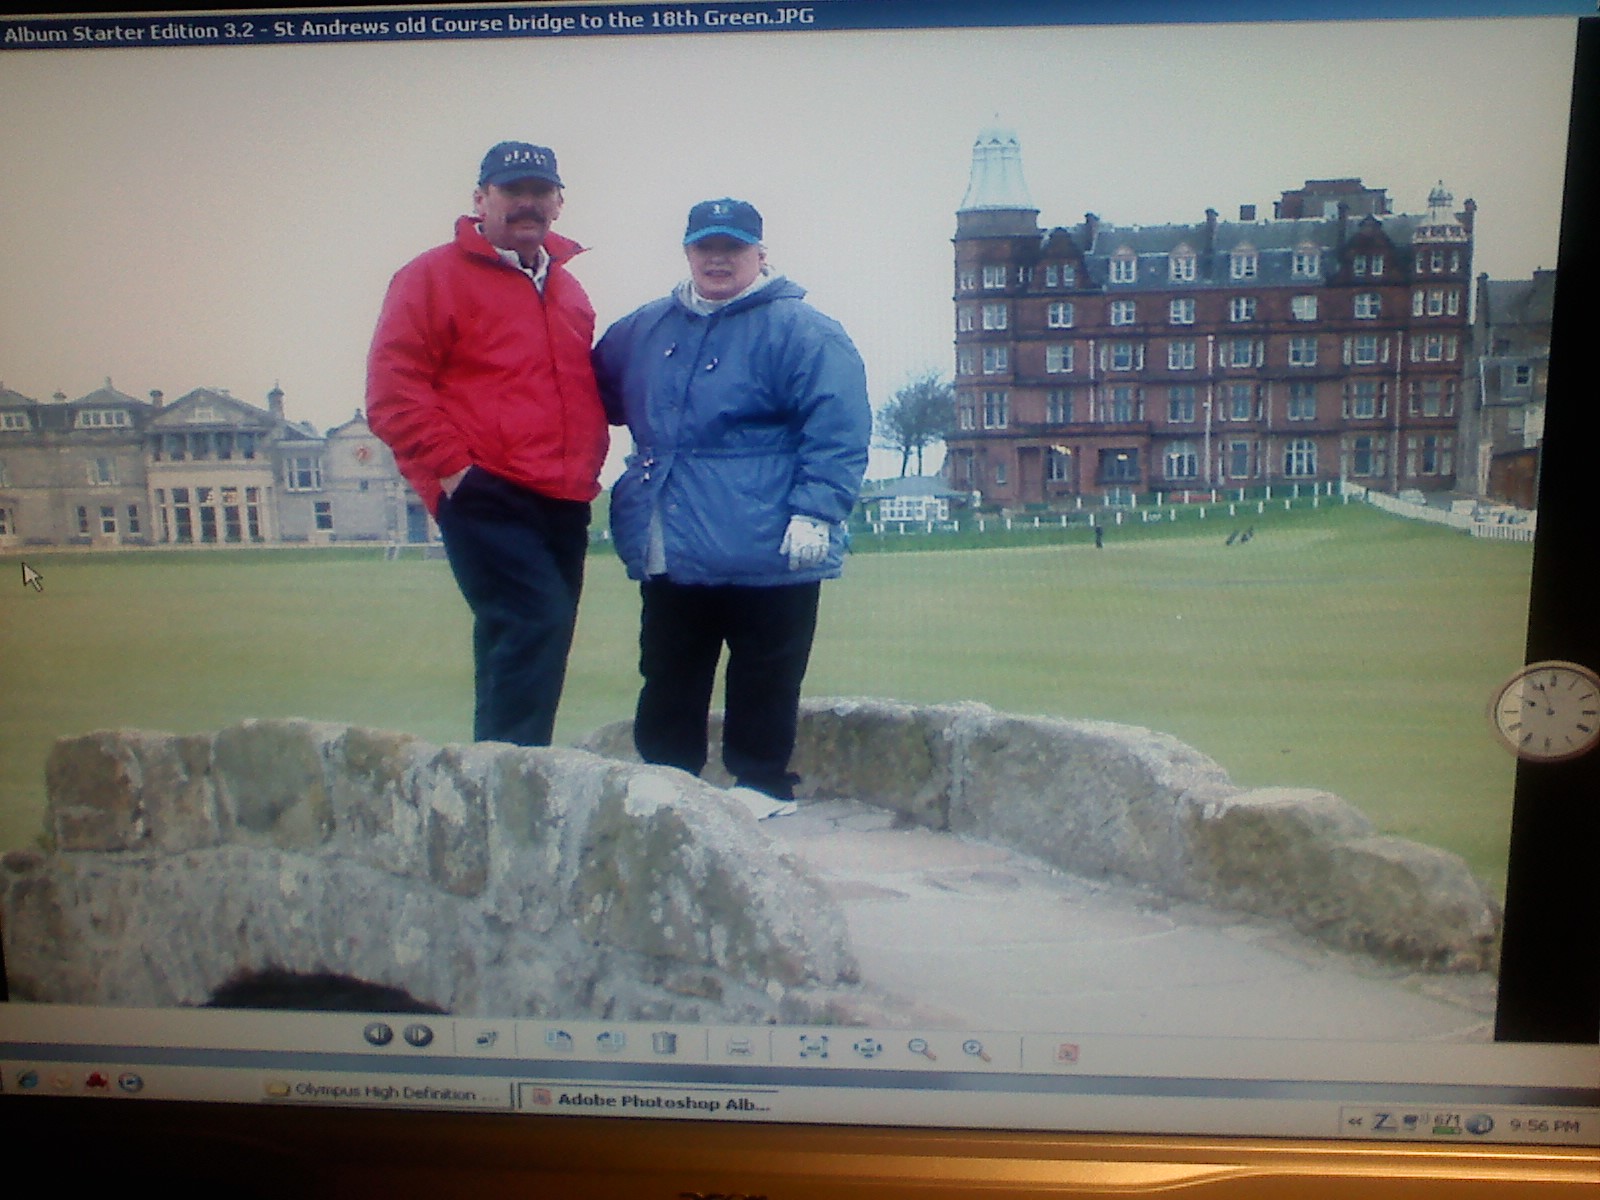 Sharon and John at St. Andrews Swilcan Bridge after a day of golf on the old course and just finishing at the 18th. Sharon got a birdie at the 11 hole.